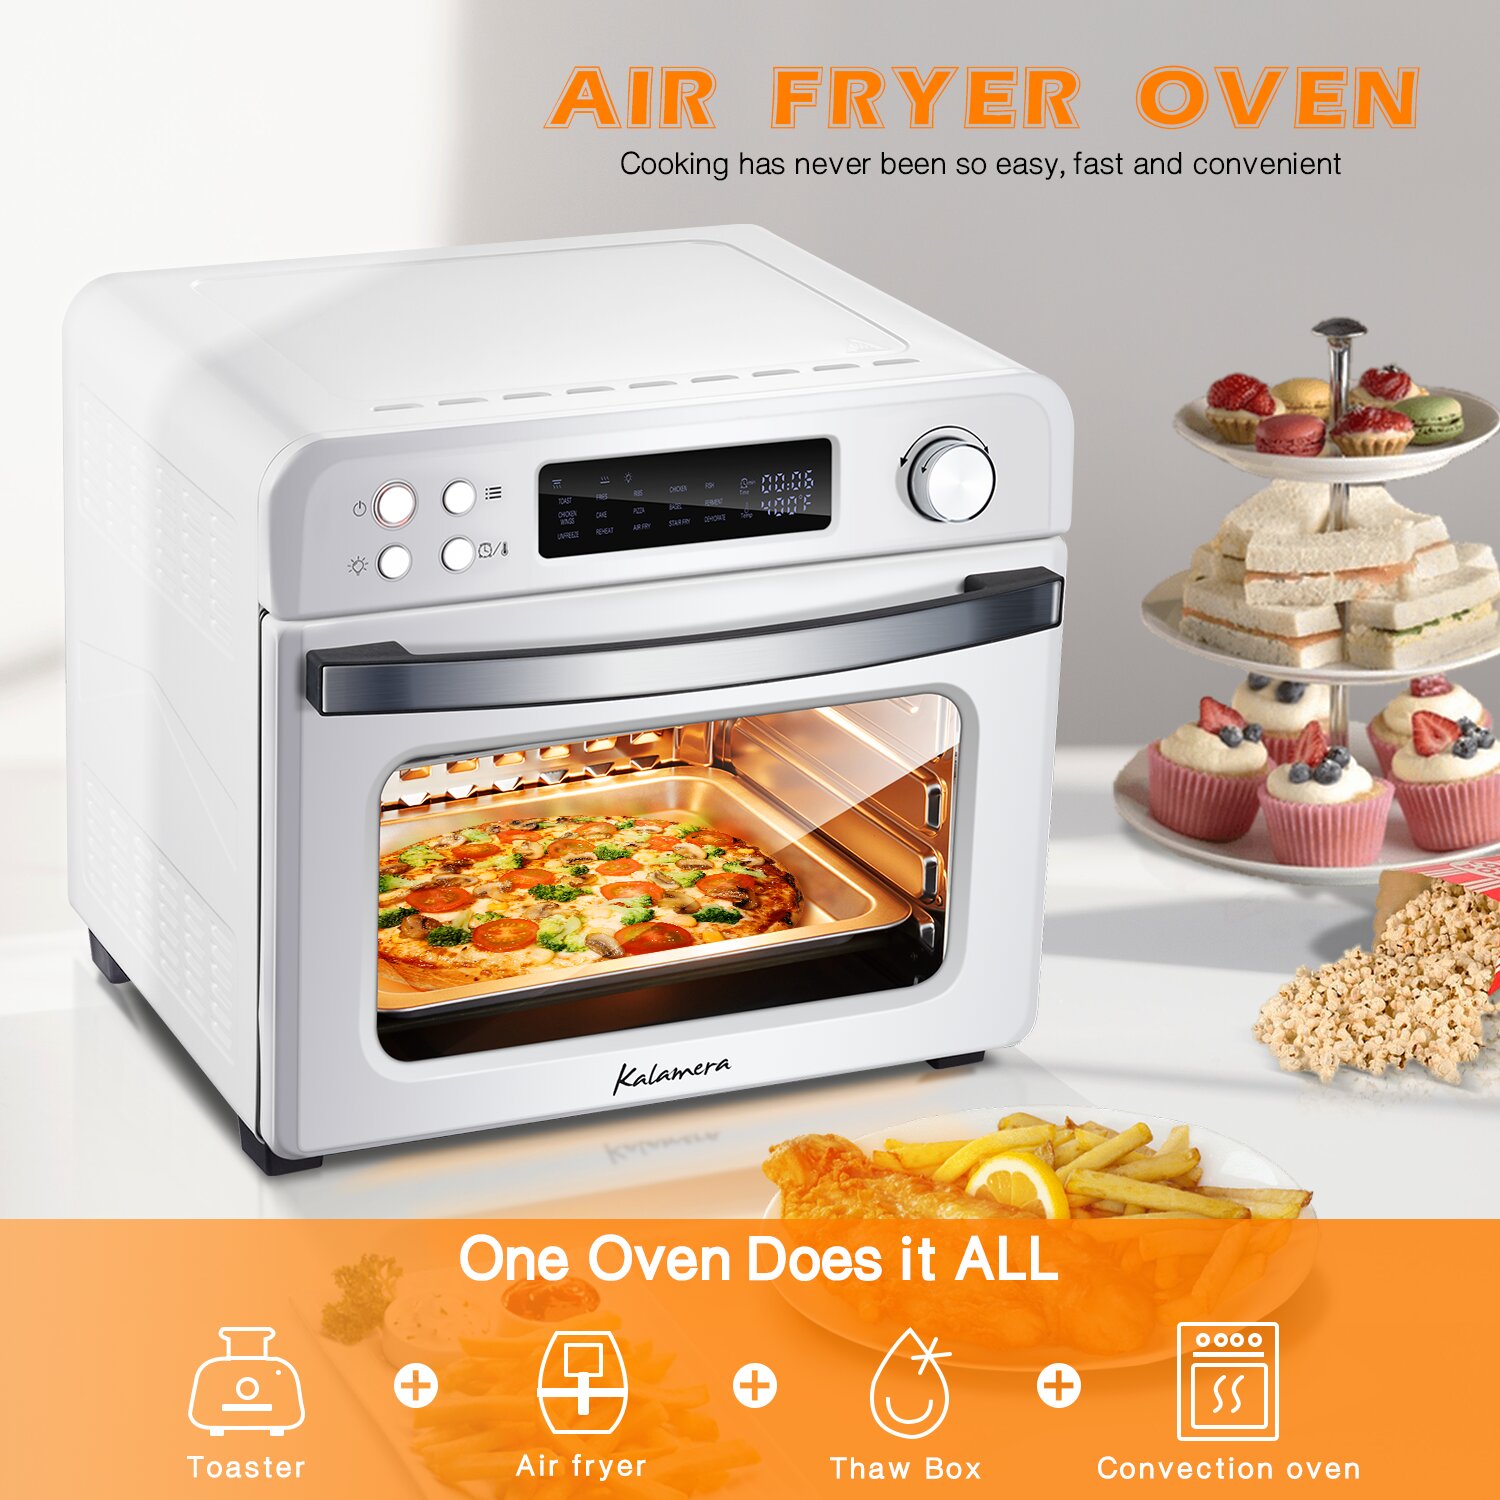 Copper Chef 2 qt Air Fryer - Turbo Cyclonic Airfryer with Rapid Air Technology for Less Oil-Less Cooking. Includes Recipe Book (Black)